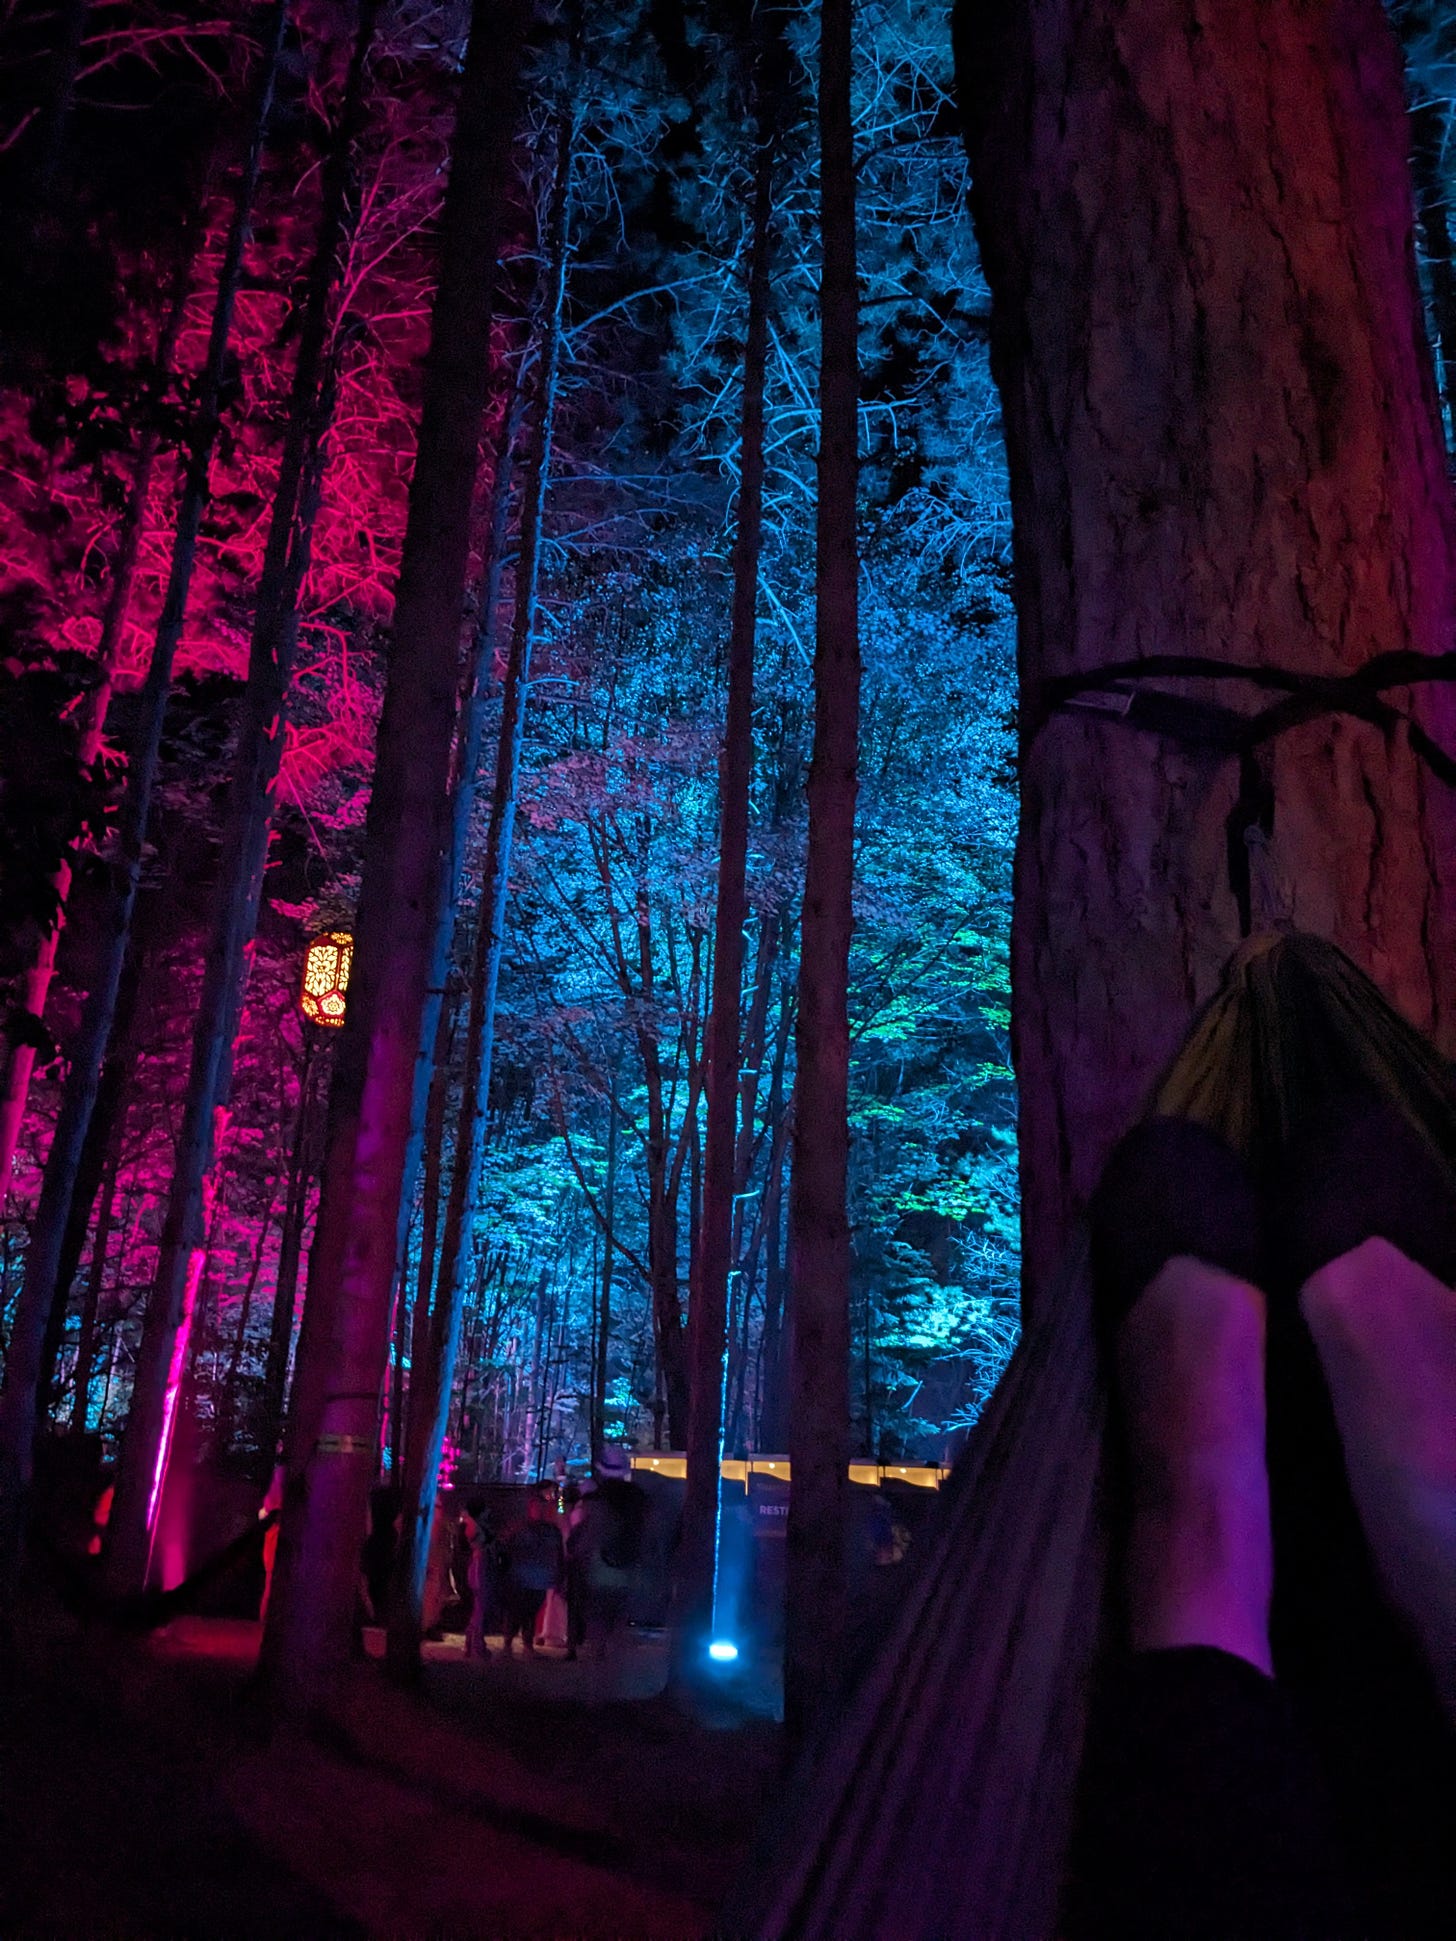 in the forest at night with branches lit from below by multicolored lights, and in the foreground the end of a hammock tied to a tree trunk with my dirty slipper-clad feet propped up